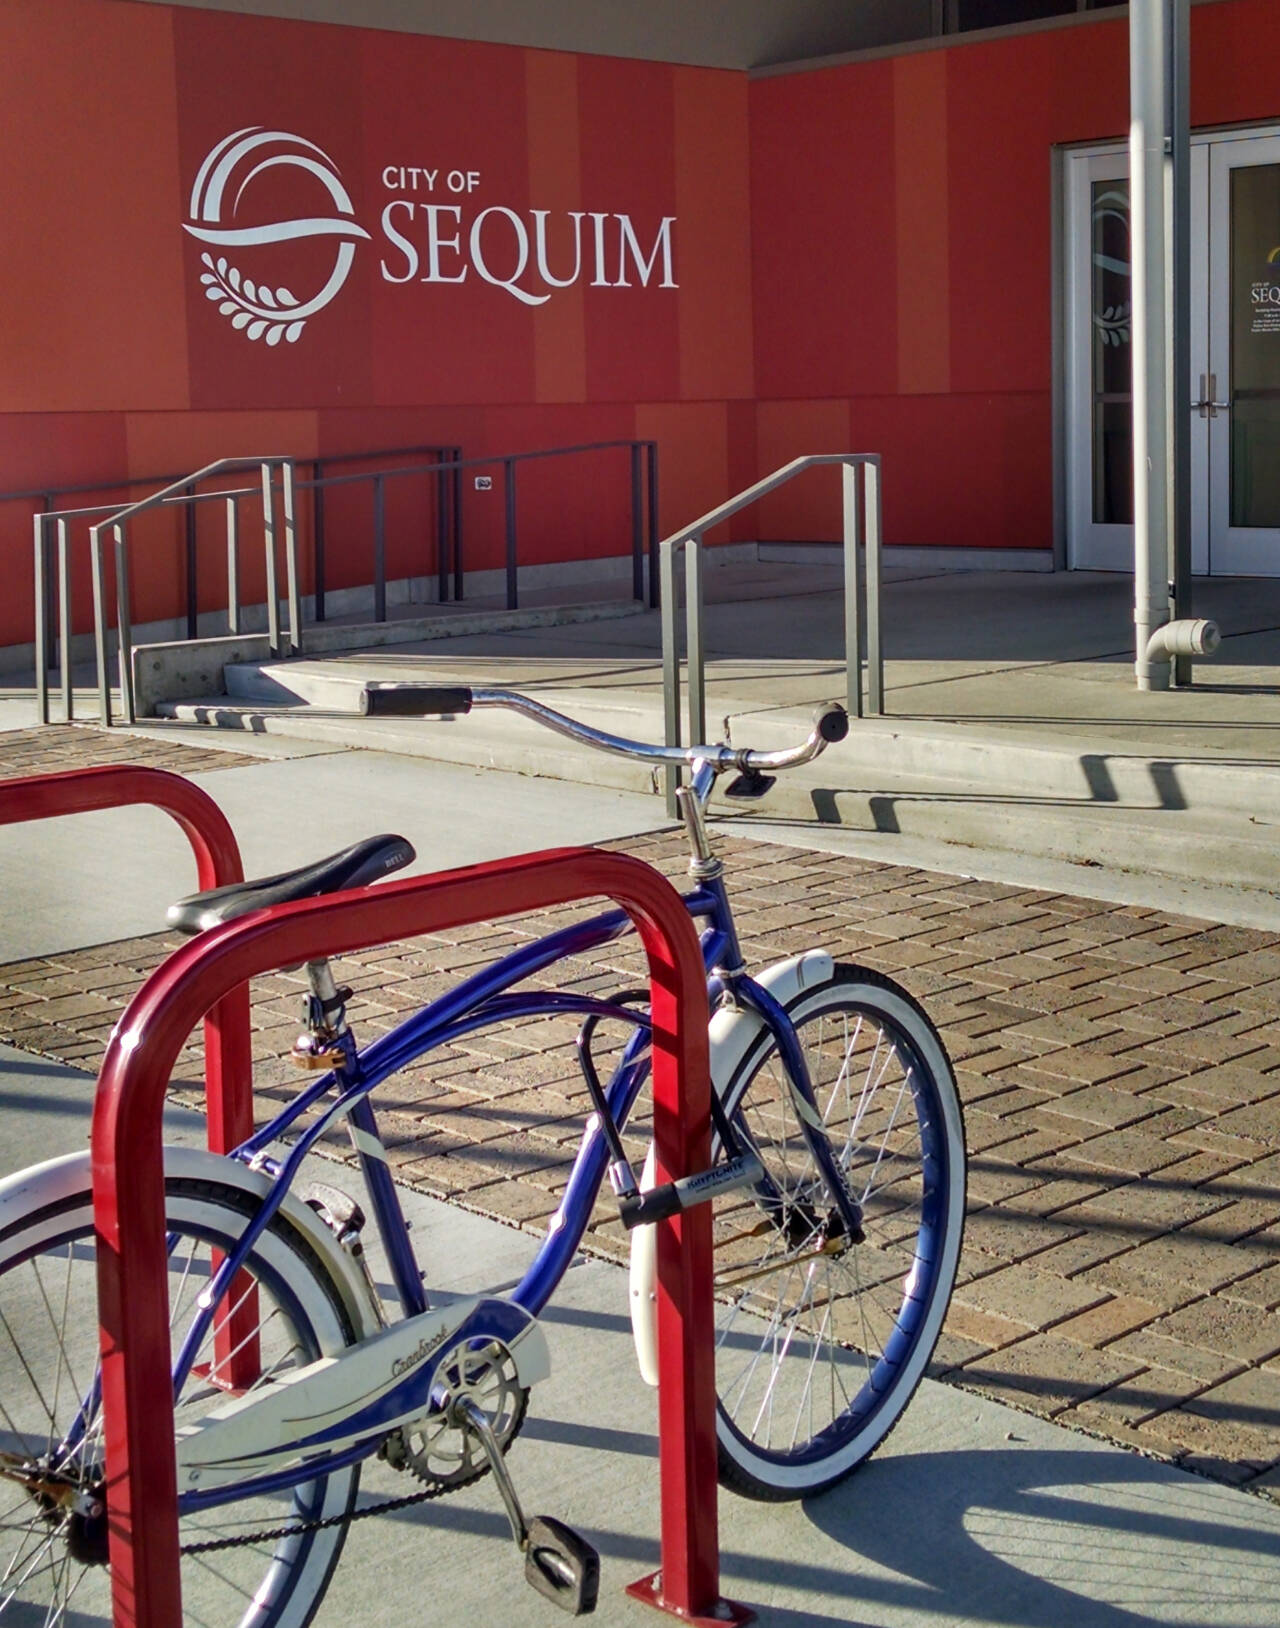 Photo courtesy of City of Sequim
The City of Sequim is seeking input, via a survey, about local bicycling as the city applies for renewal of Bicycle Friendly Community status from the League of American Bicyclists.